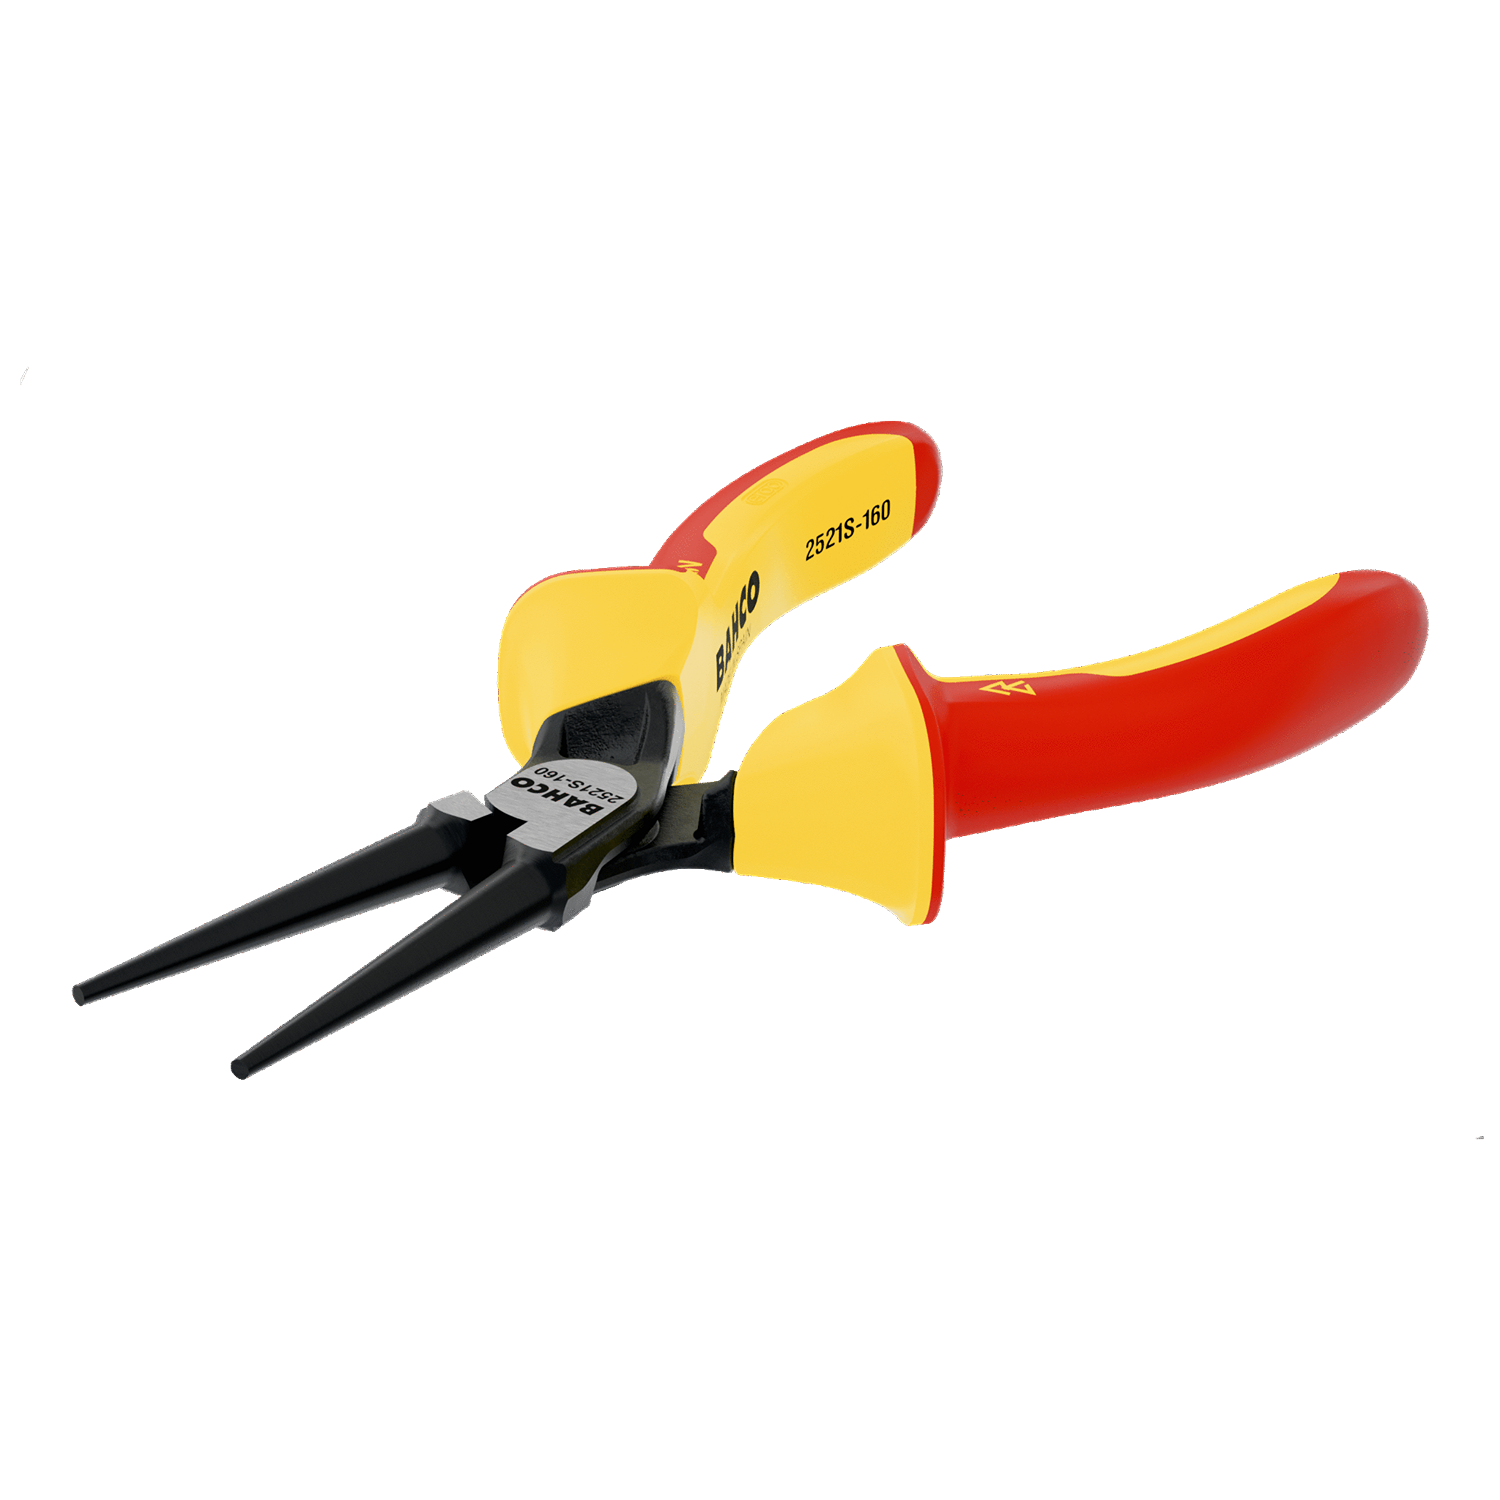 BAHCO 2521S ERGO Round Nose Plier with Insulated Dual Handles - Premium Round Nose Plier from BAHCO - Shop now at Yew Aik.